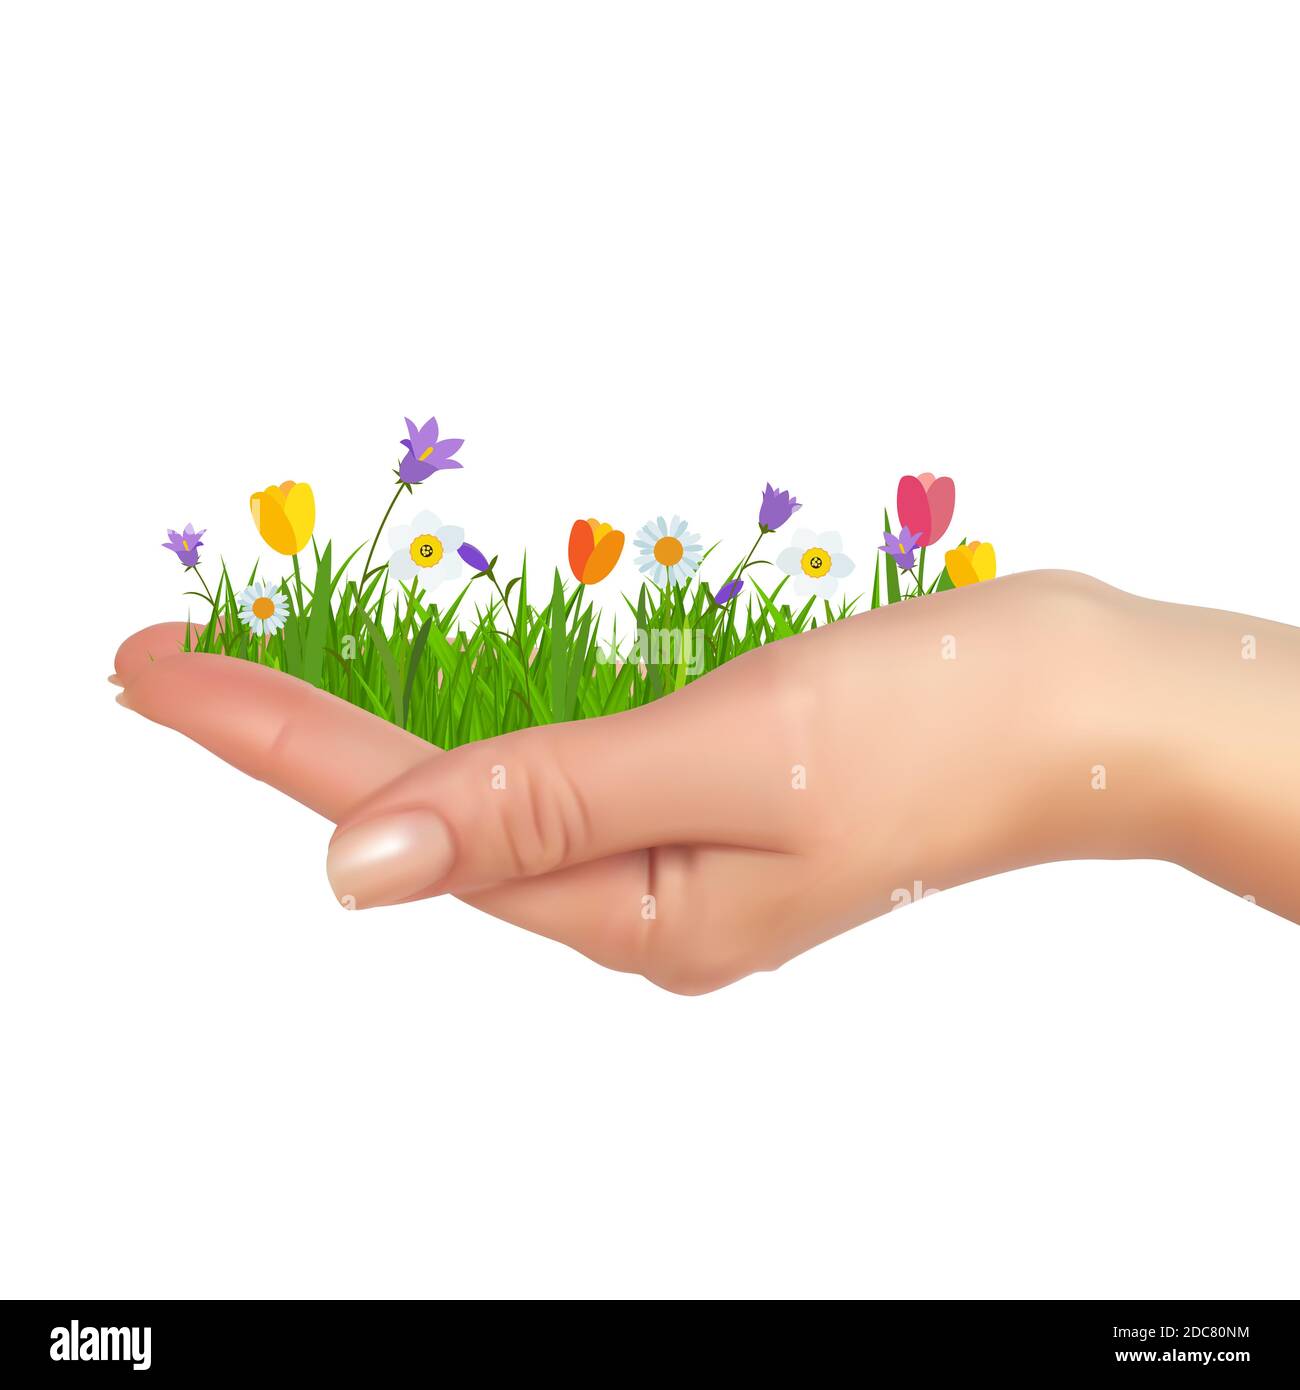 Grass and flowers in hand. Spring is cooming background. Illustration. Stock Photo